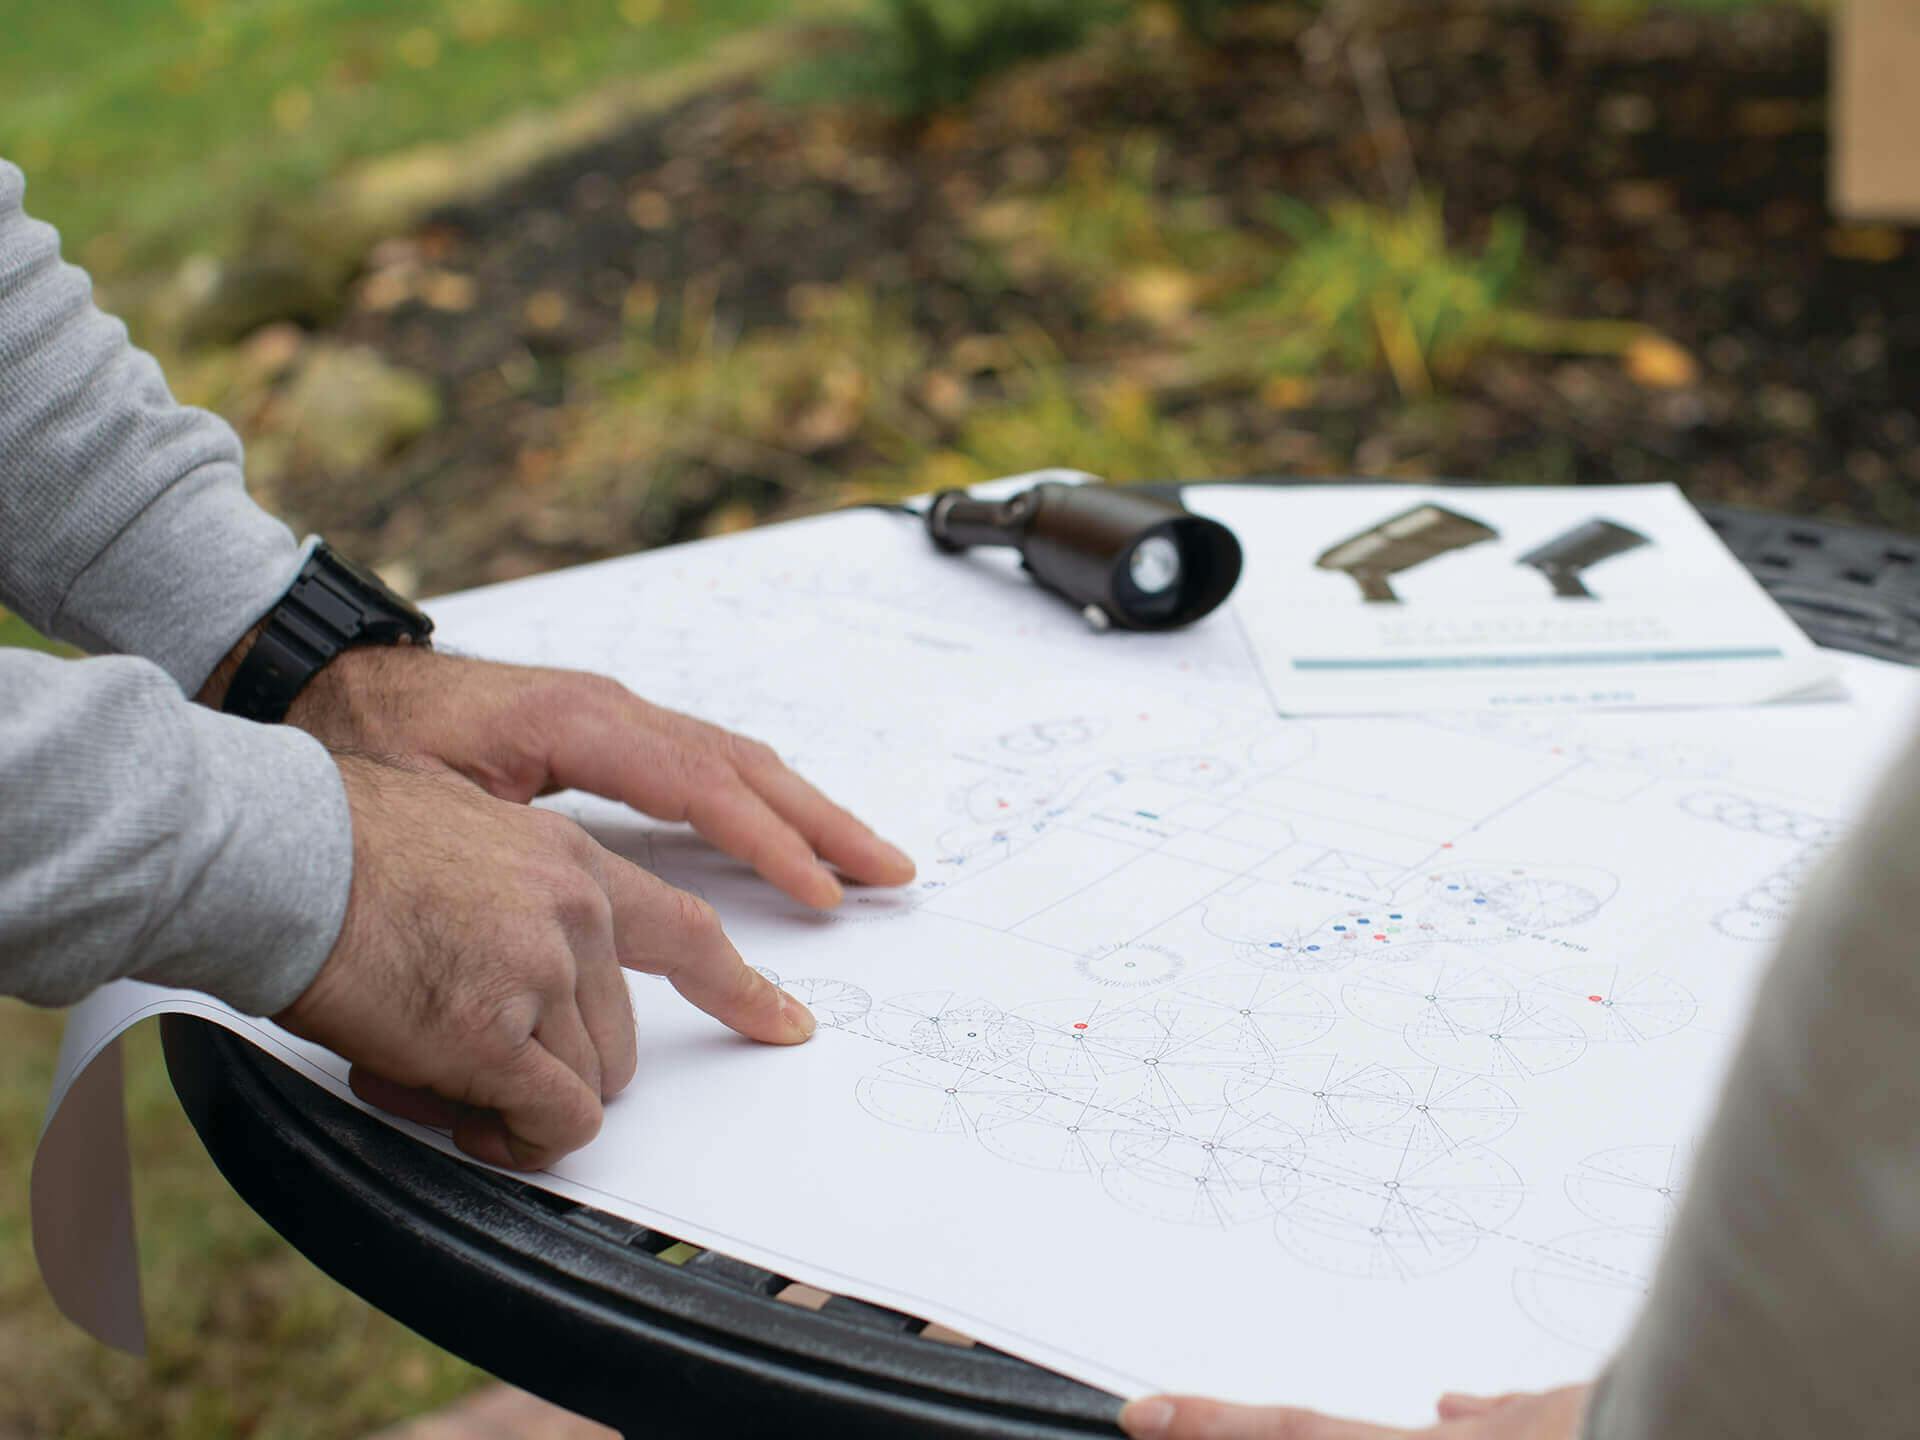 Close up of hands working on a blueprint on an outdoor garden table